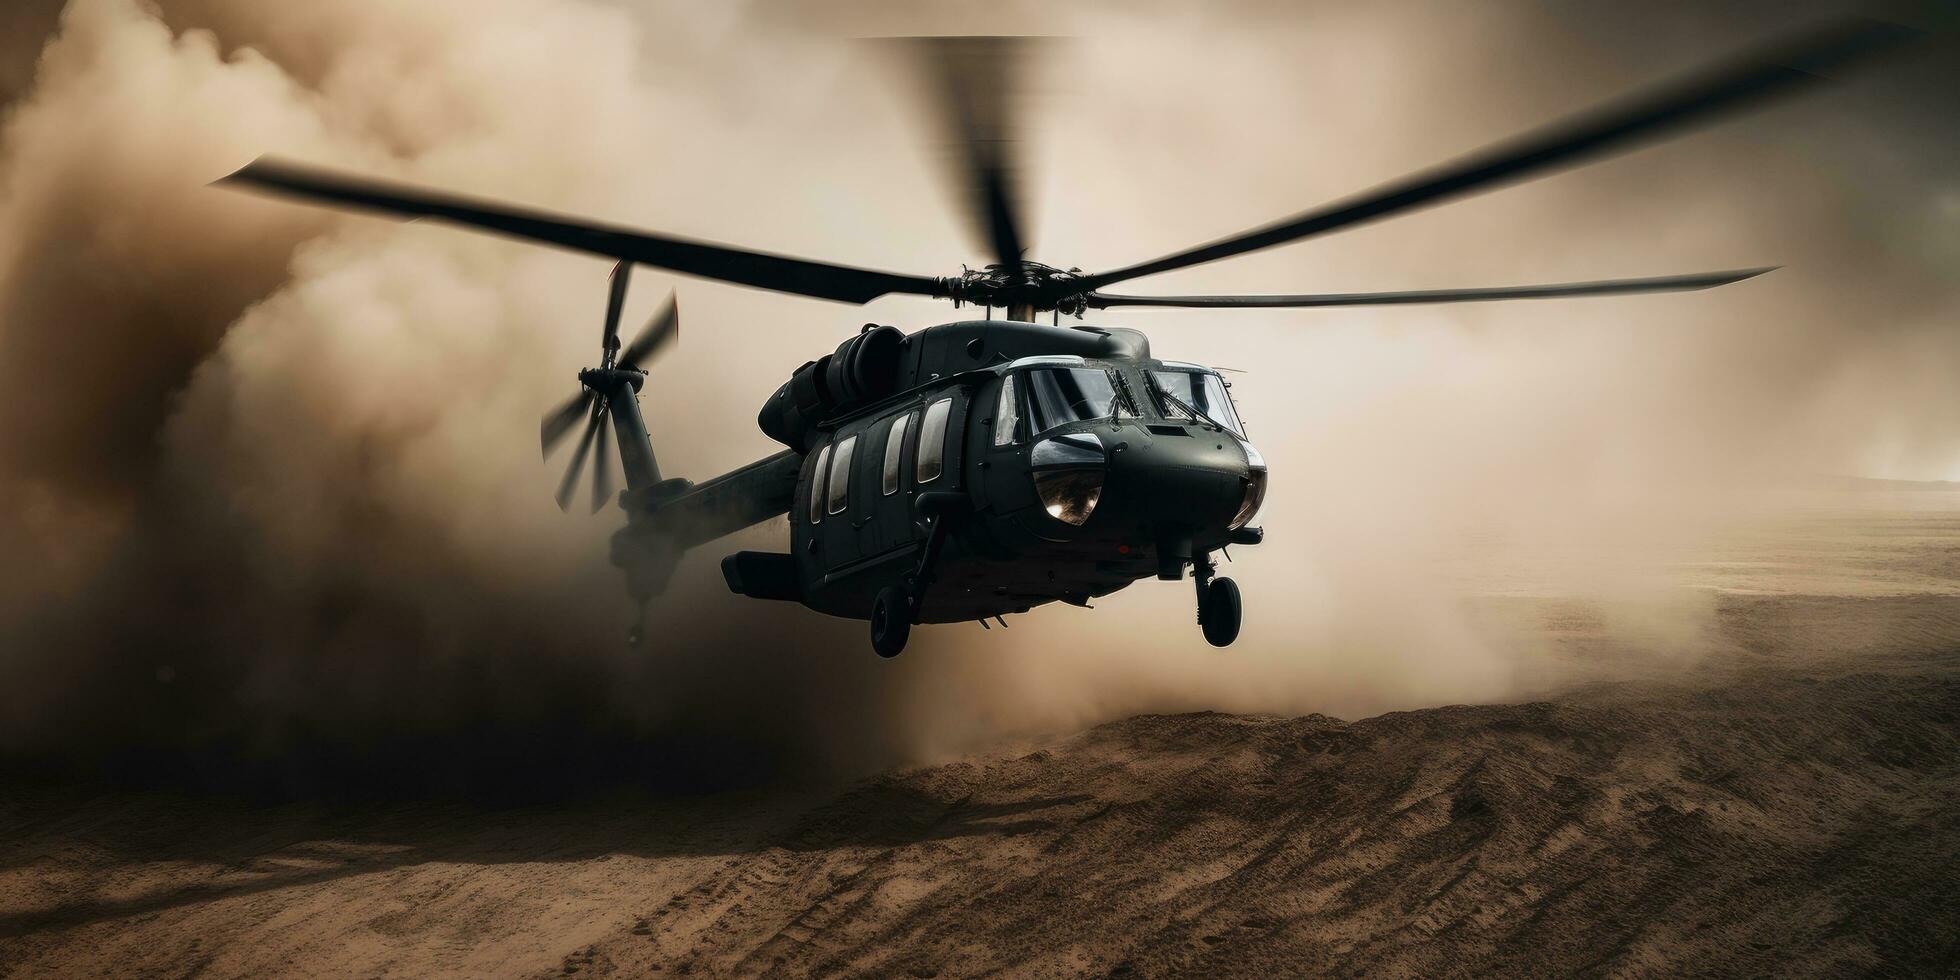 AI generated a black helicopter flying high over a dusty ground photo